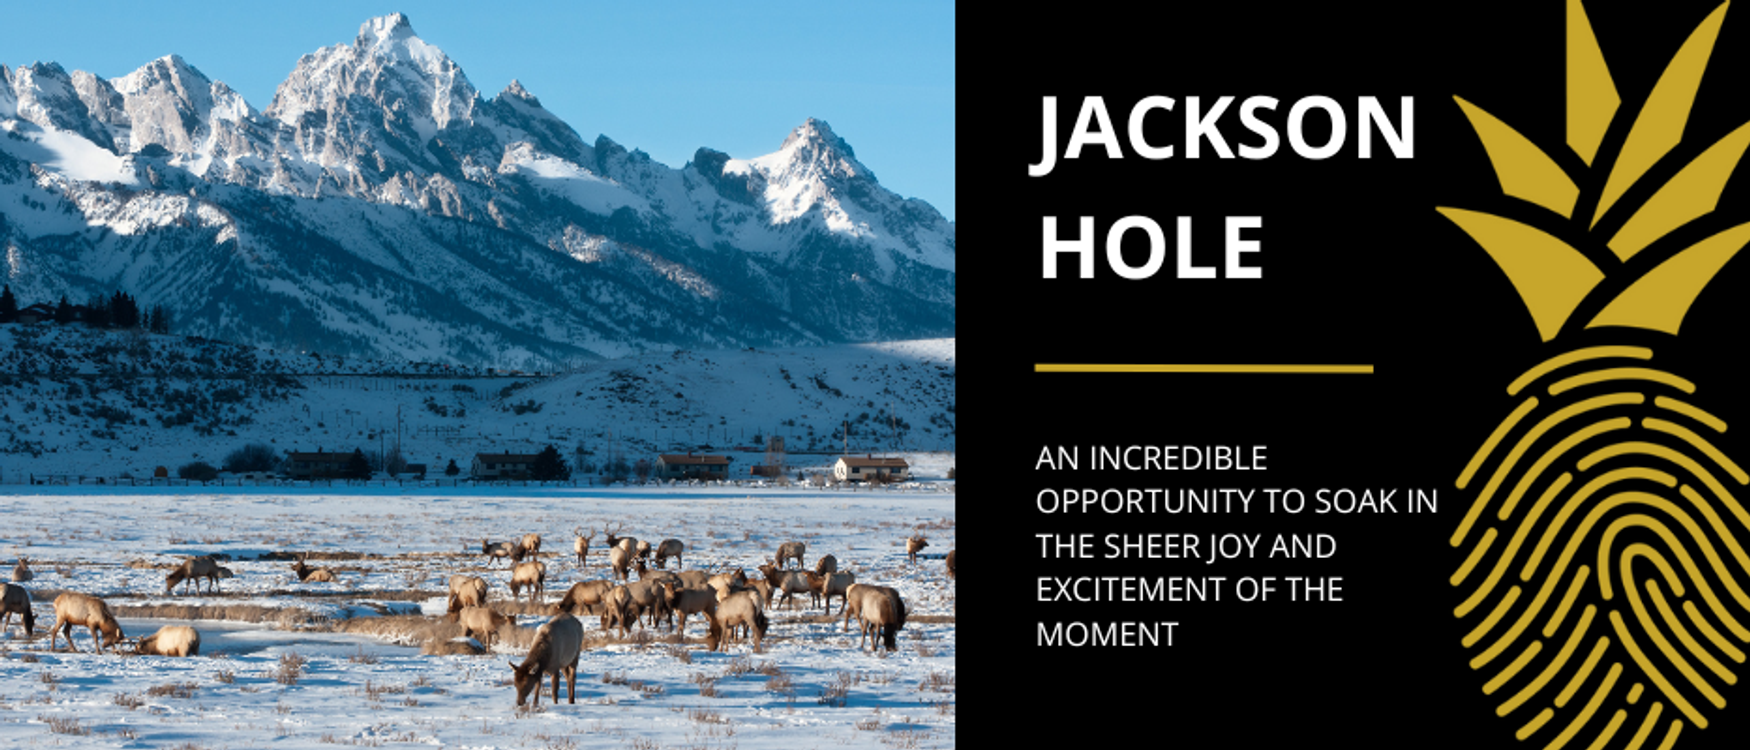 A view of Jackson Hole, Wyoming, with the snow-covered mountains in the background